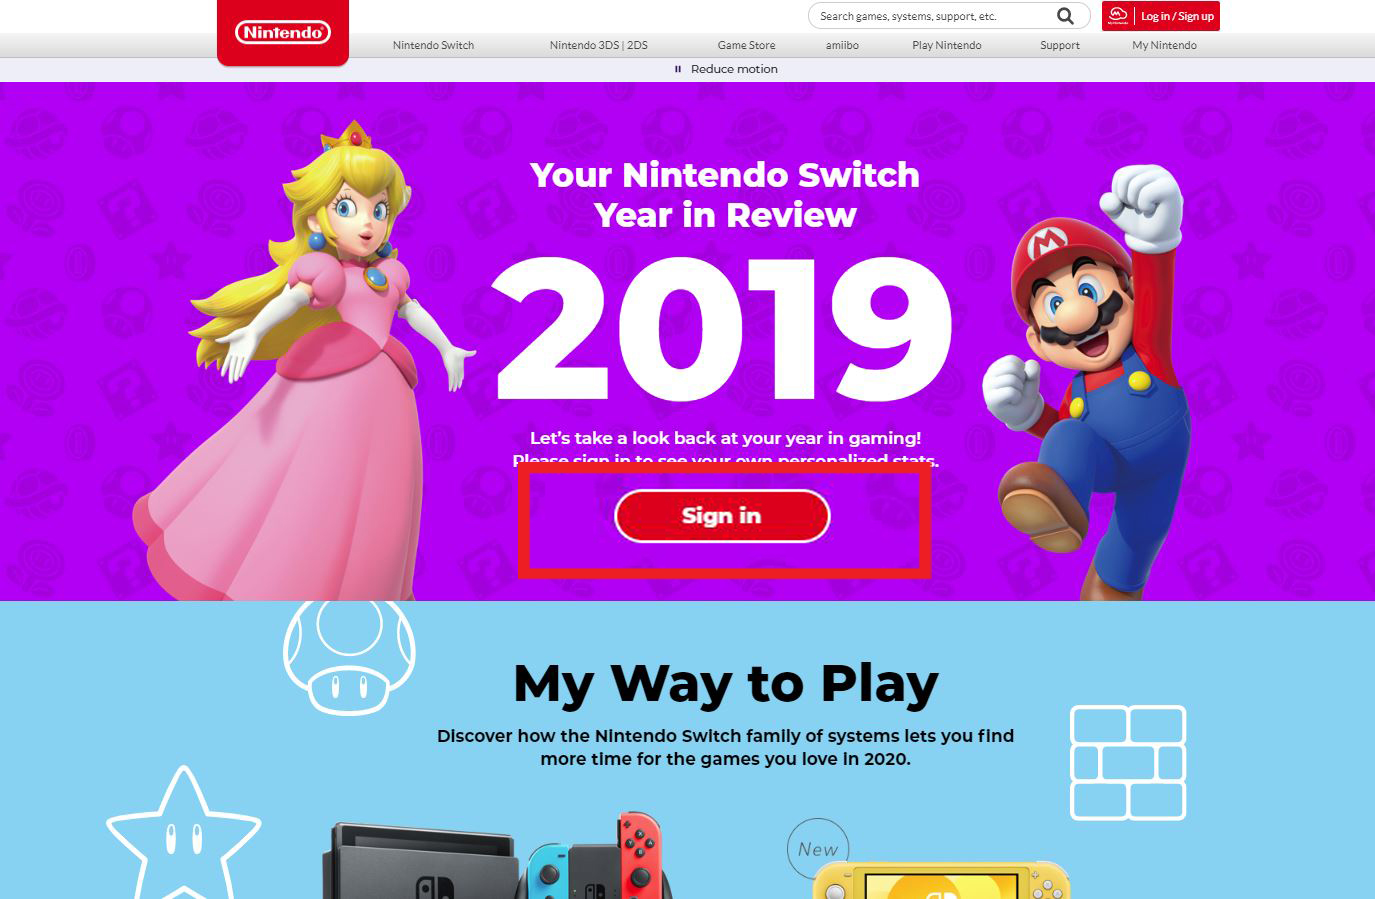 Nintendo Switch year in review